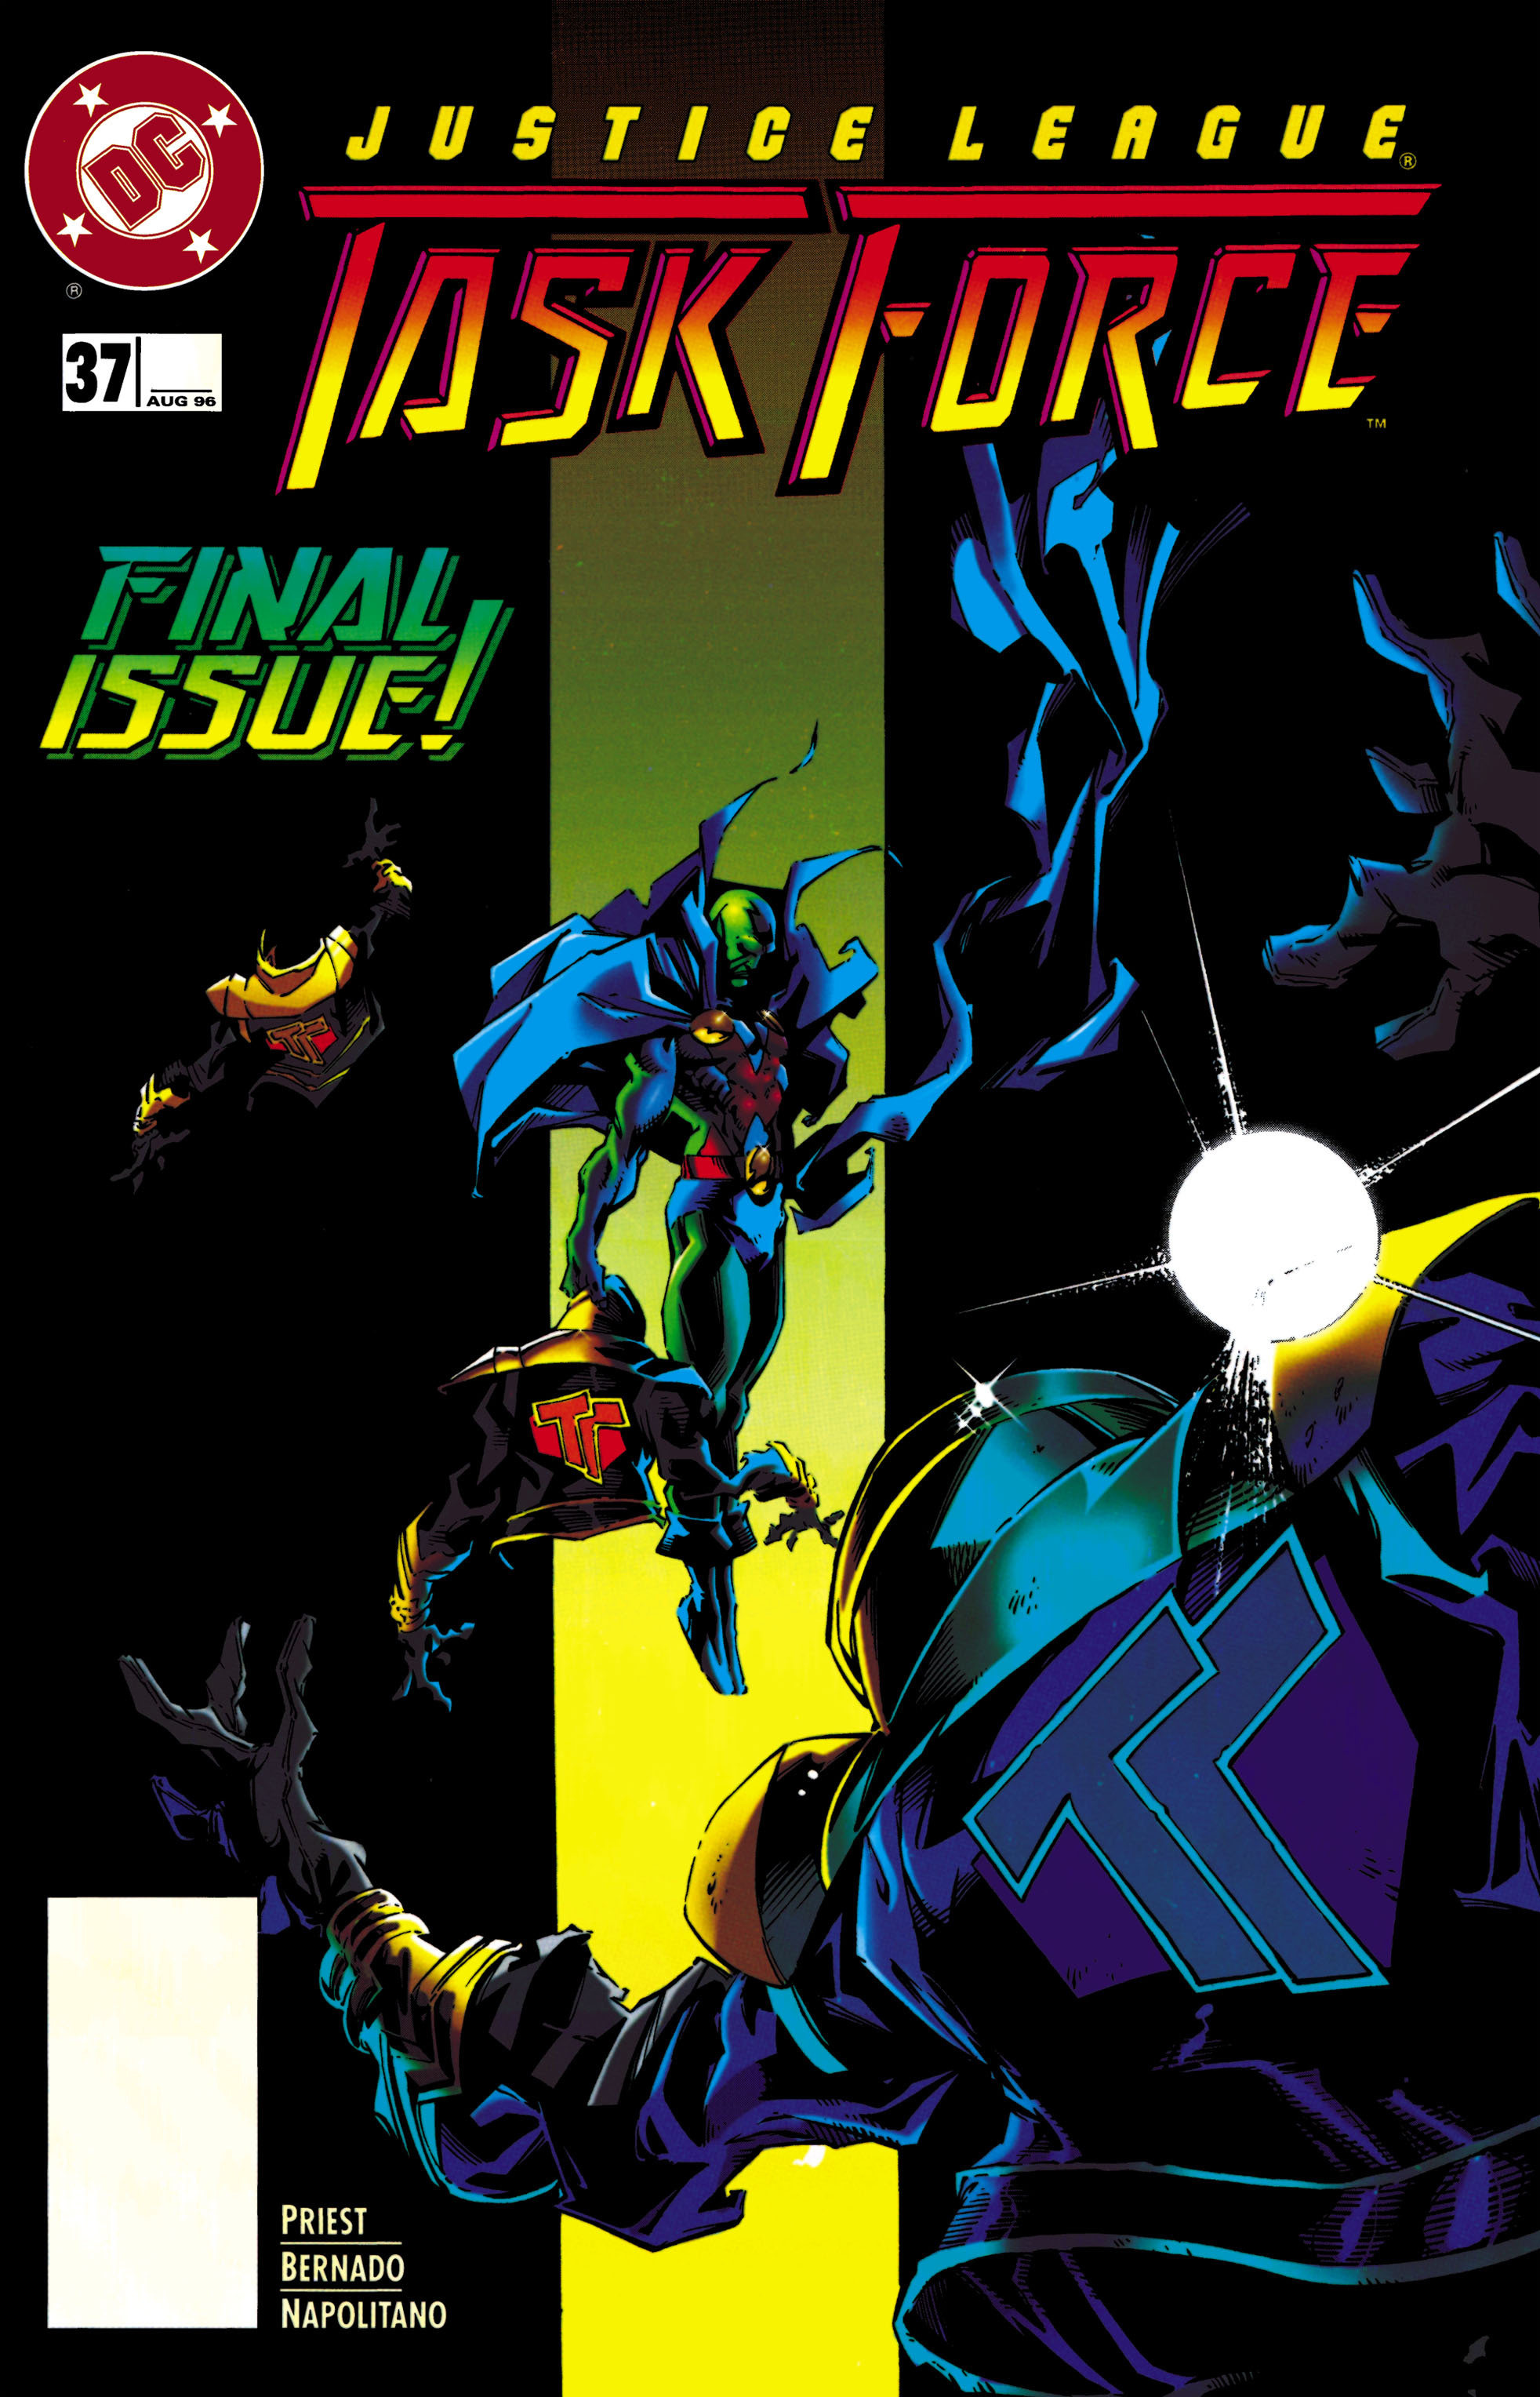 Read online Justice League Task Force comic -  Issue #37 - 1